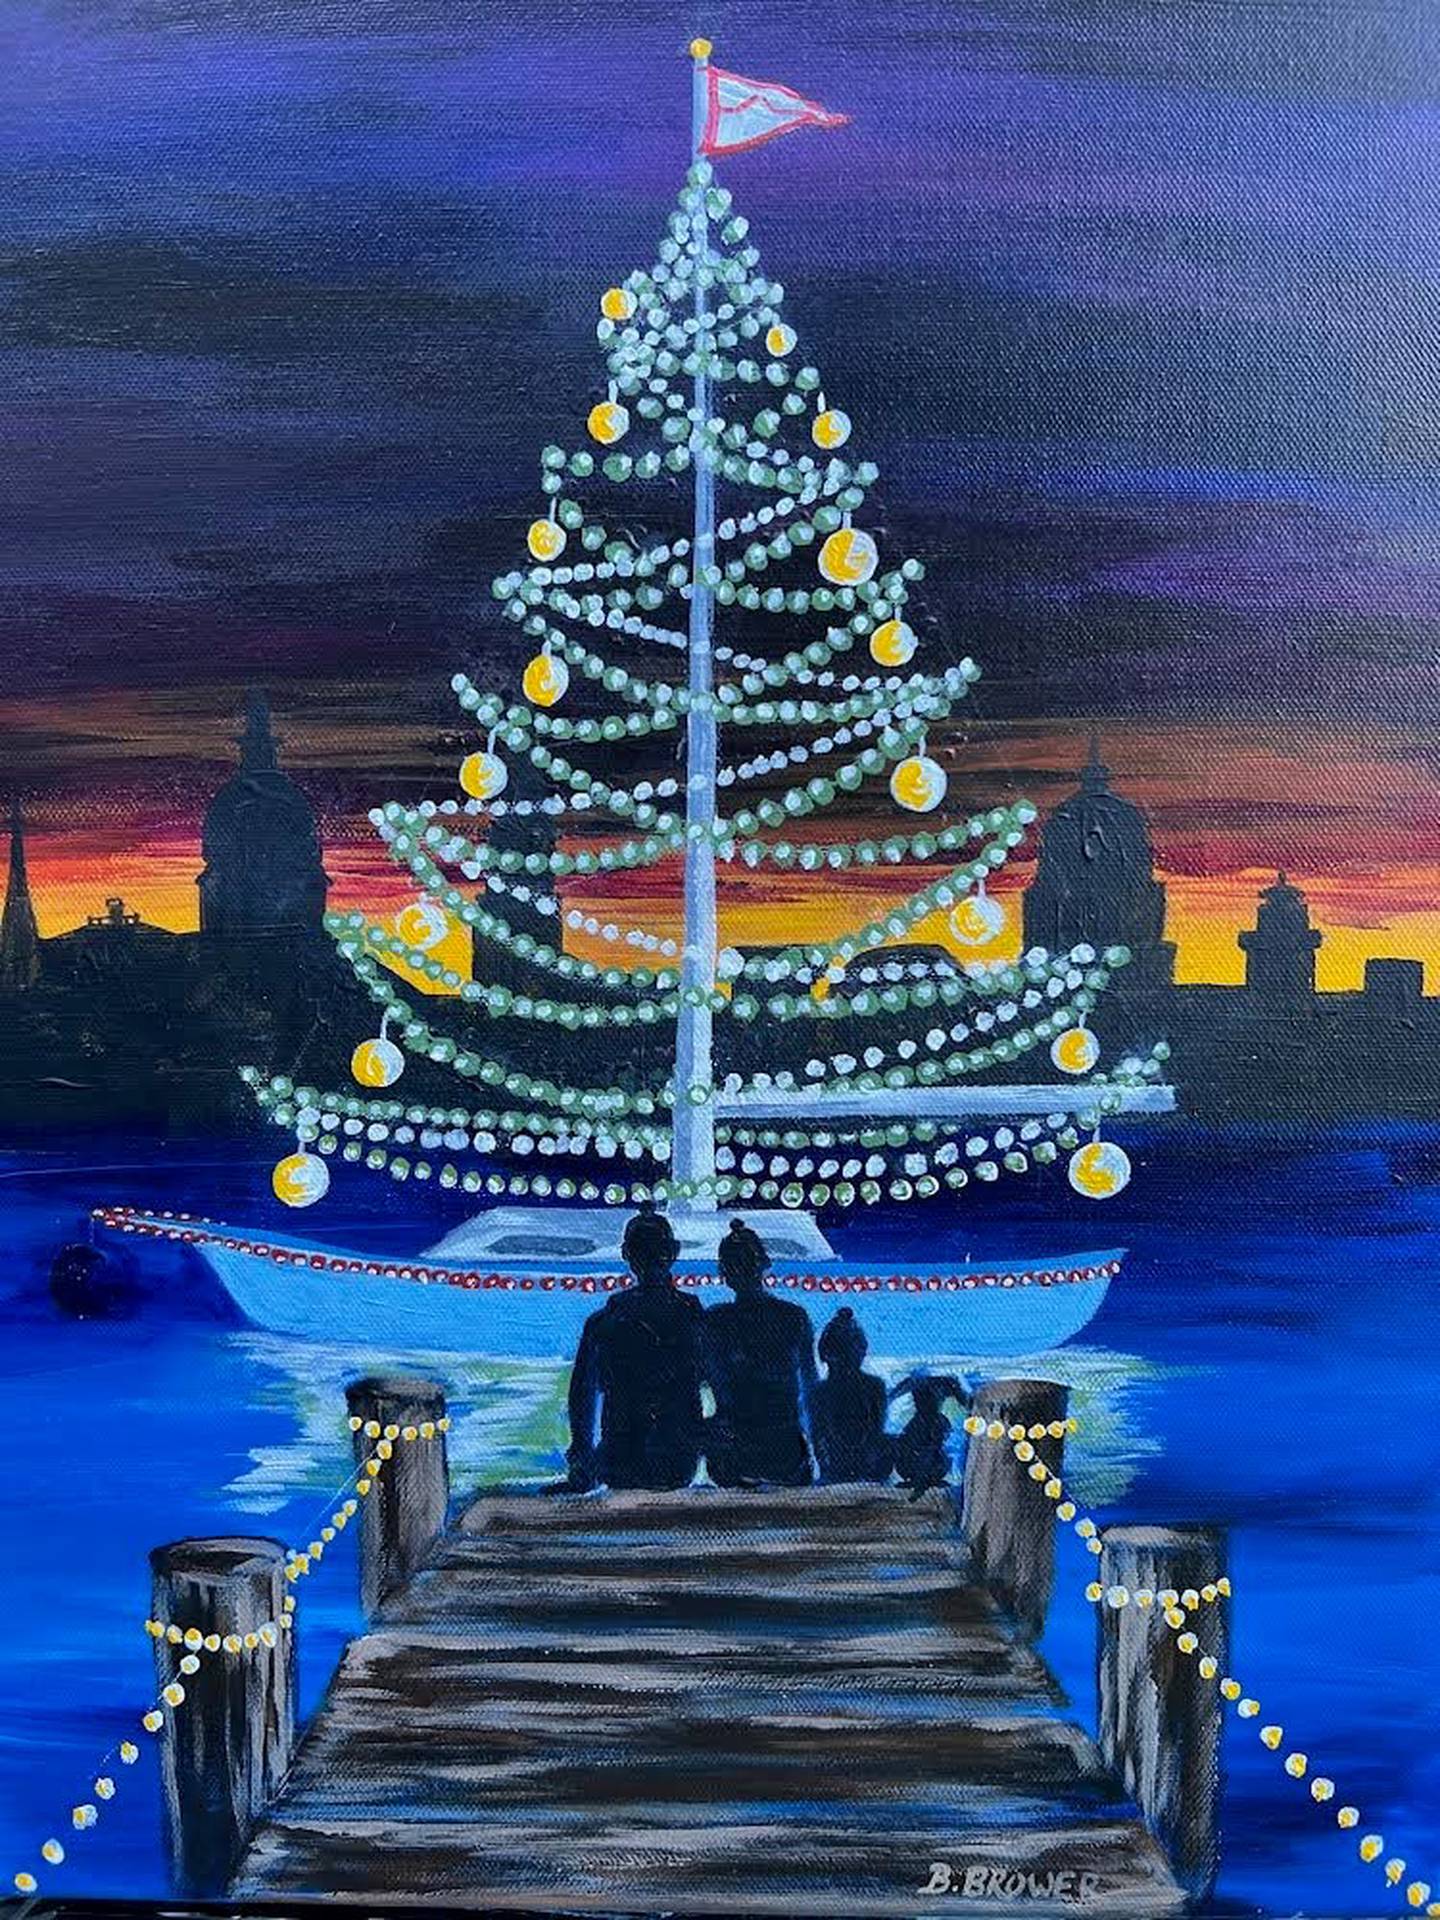 This year's Eastport Yacht Club Lights Parade poster was created by artist Barbara Brower.